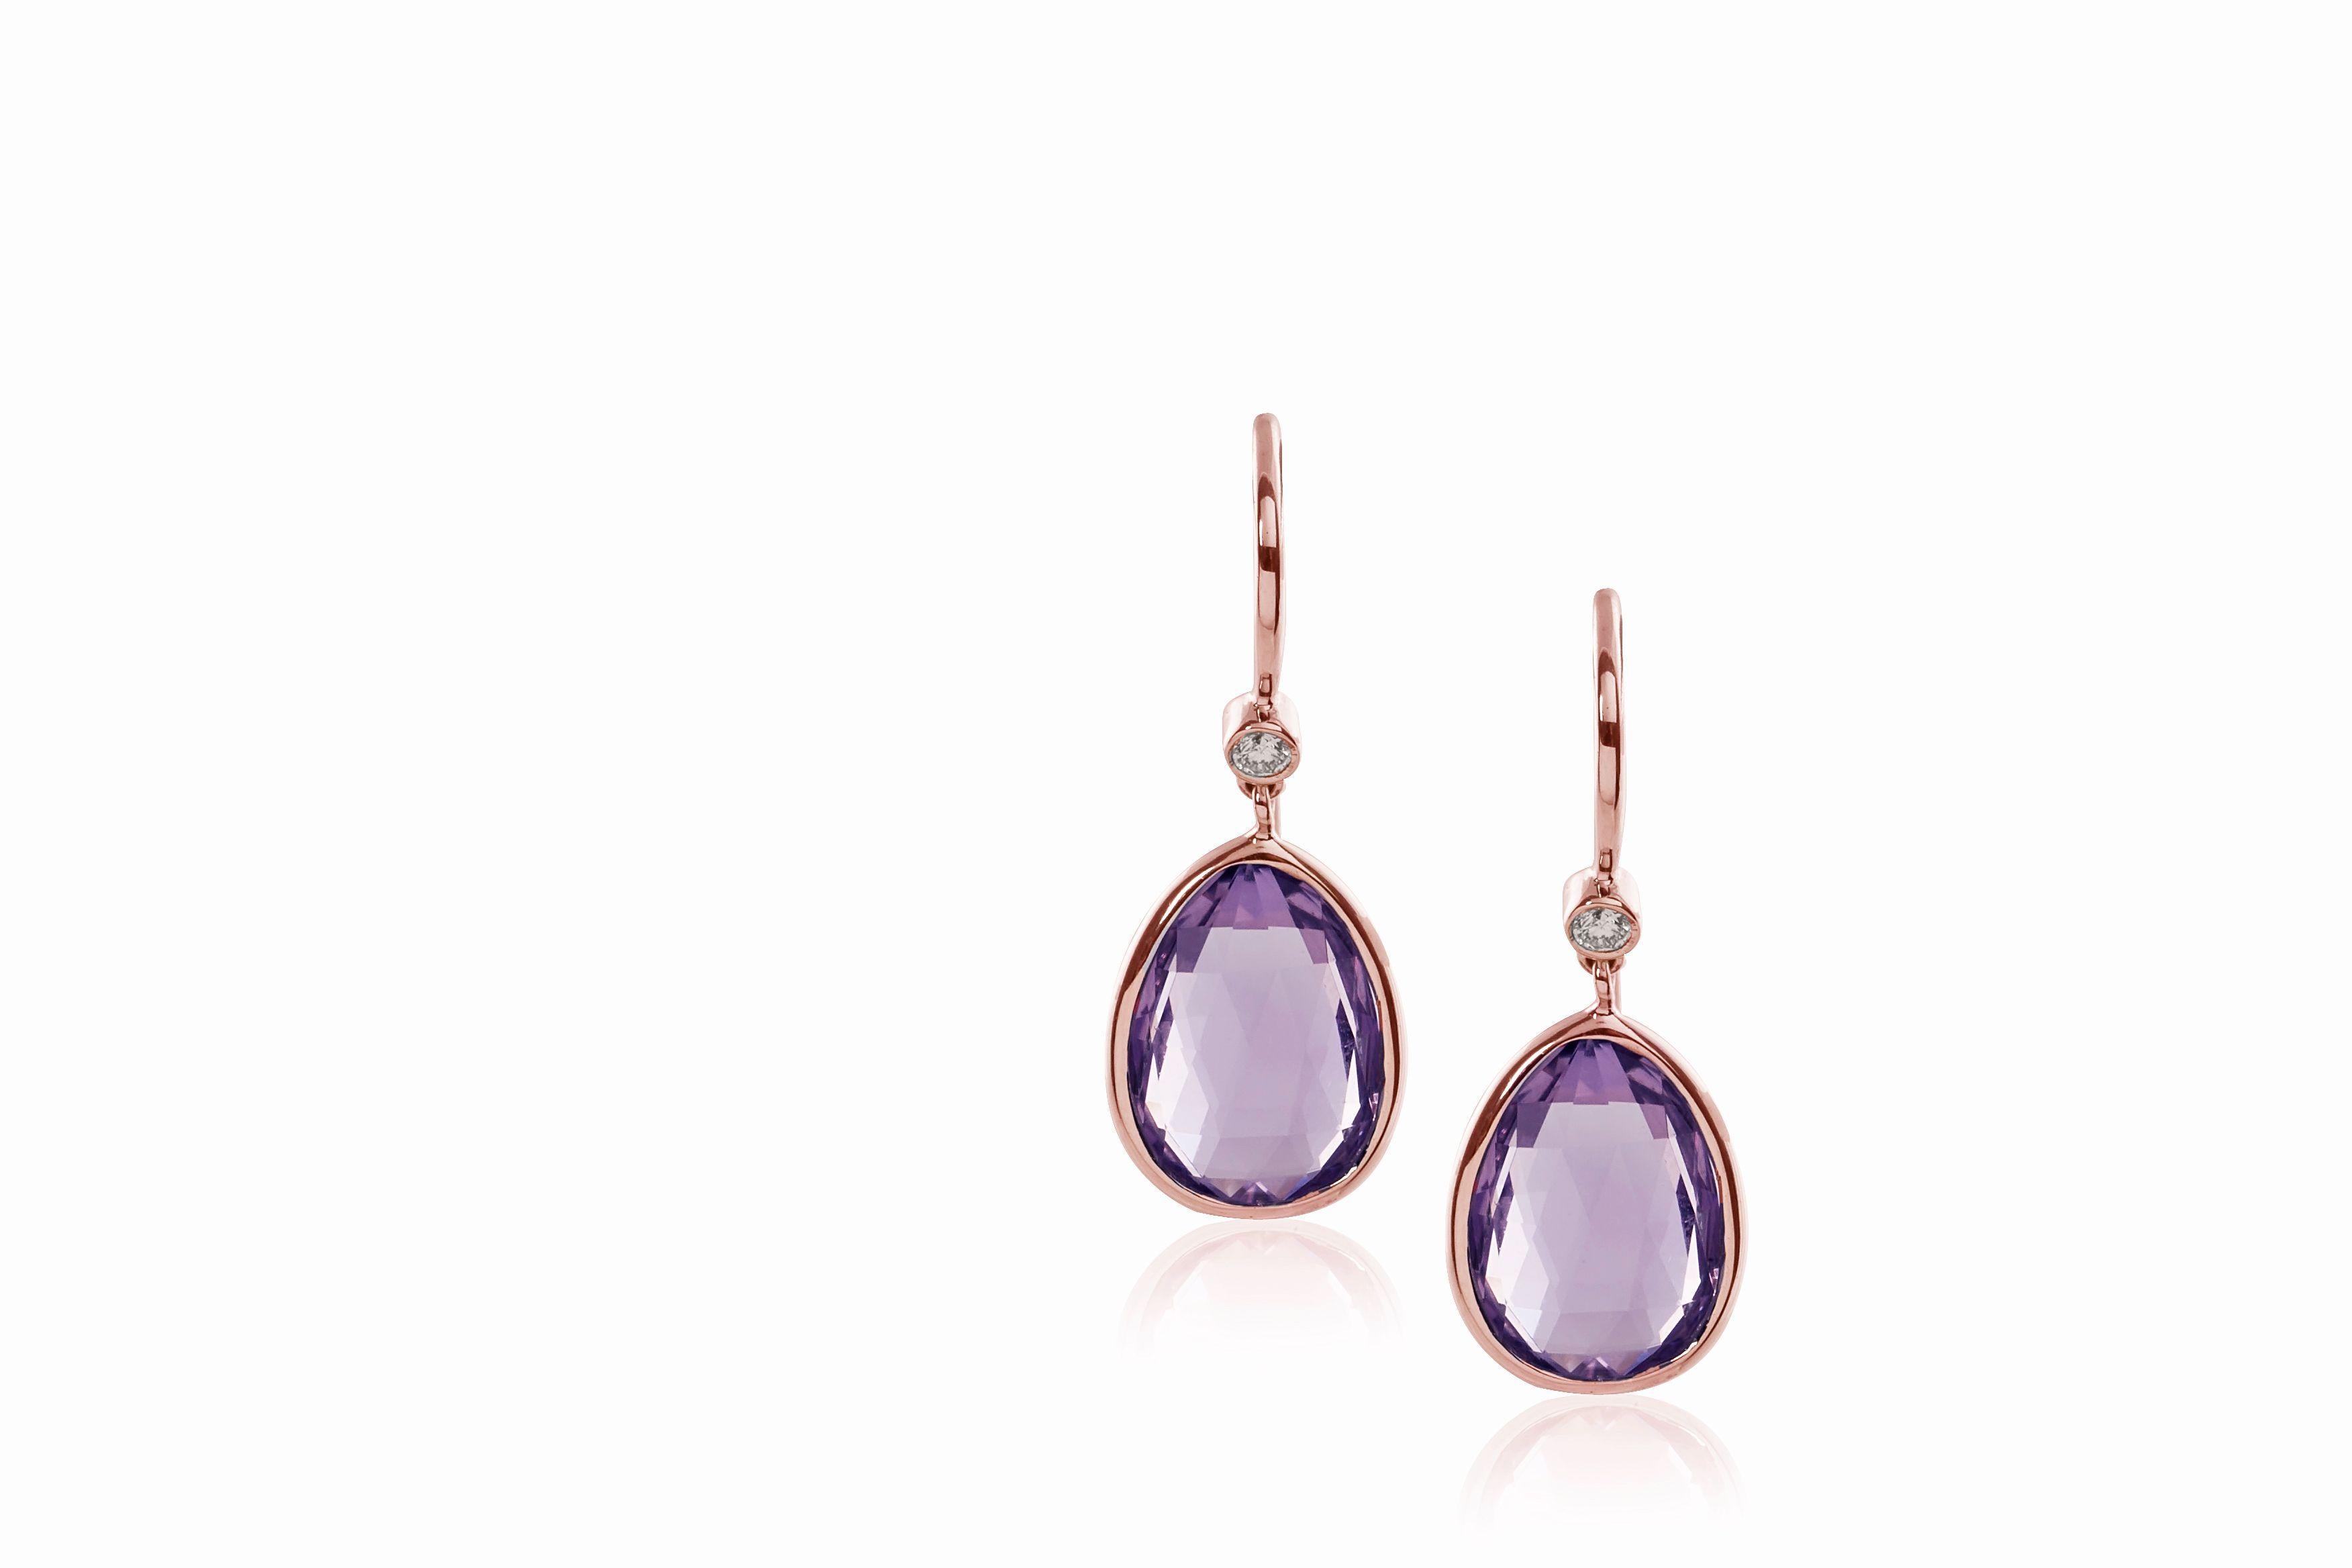 Amethyst Pear Shape Briolette with Diamond Earrings in 18K Pink Gold, from 'Gossip' Collection

Stone size: 14 x 20 mm

Gemstone Approx Wt: Amethyst - 27.80 Carats

Diamonds: G-H / VS, Approx Wt: 0.14 Carats 